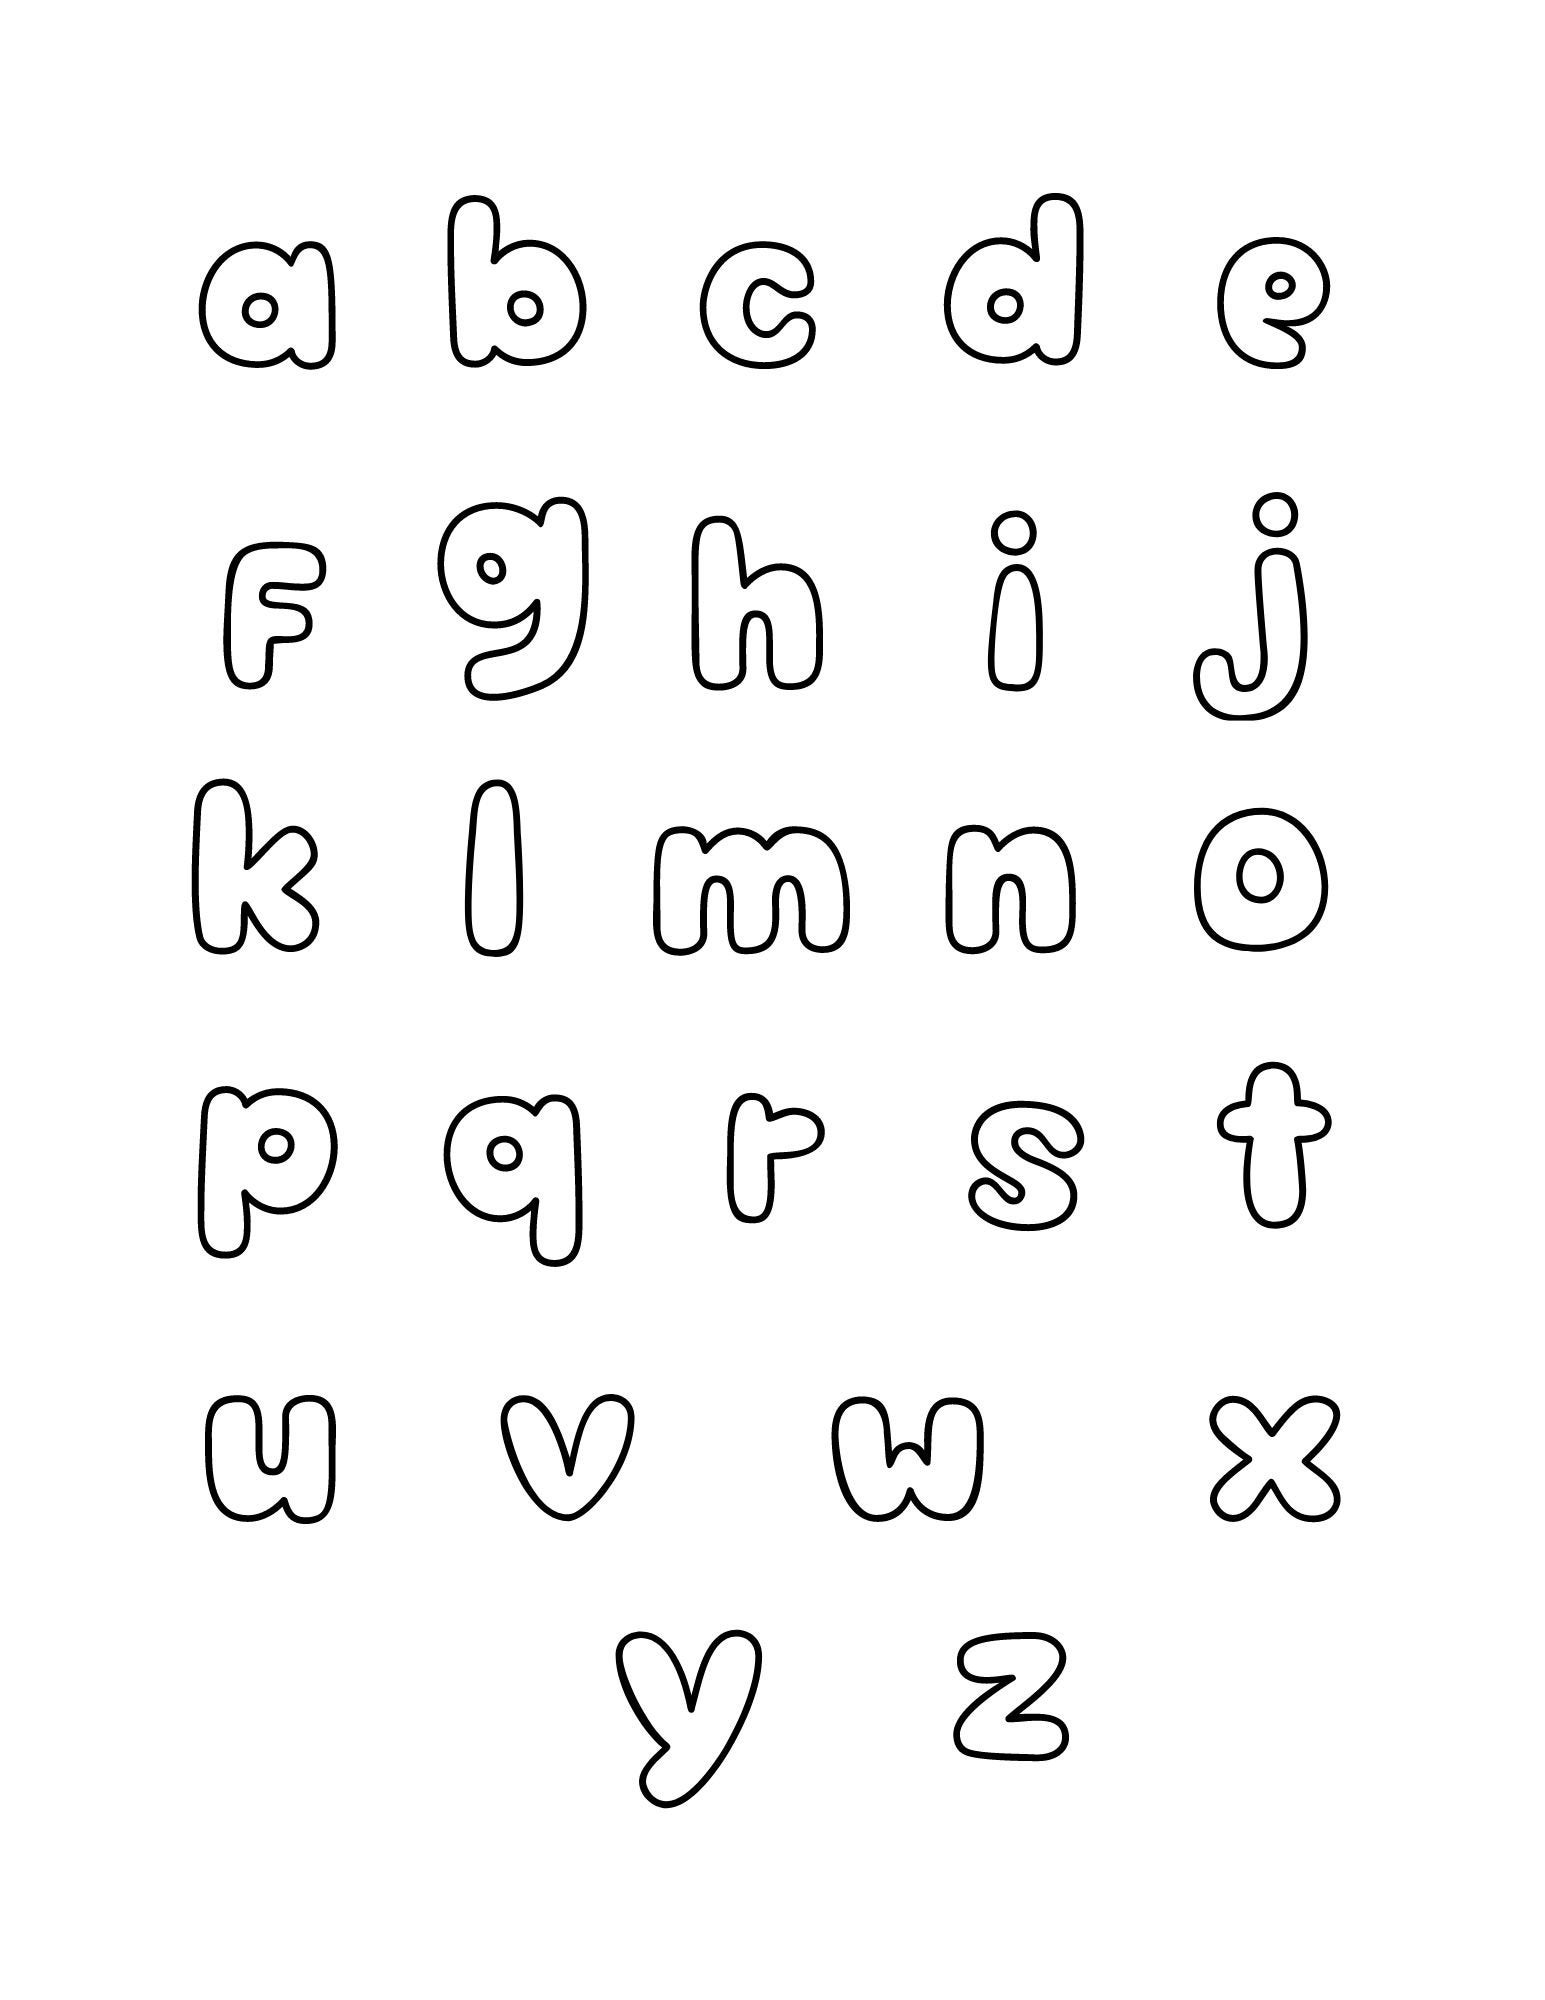 ABC Rounded Edges Lowercase Letters PDF 27 Pages, a Letter per Page and ...